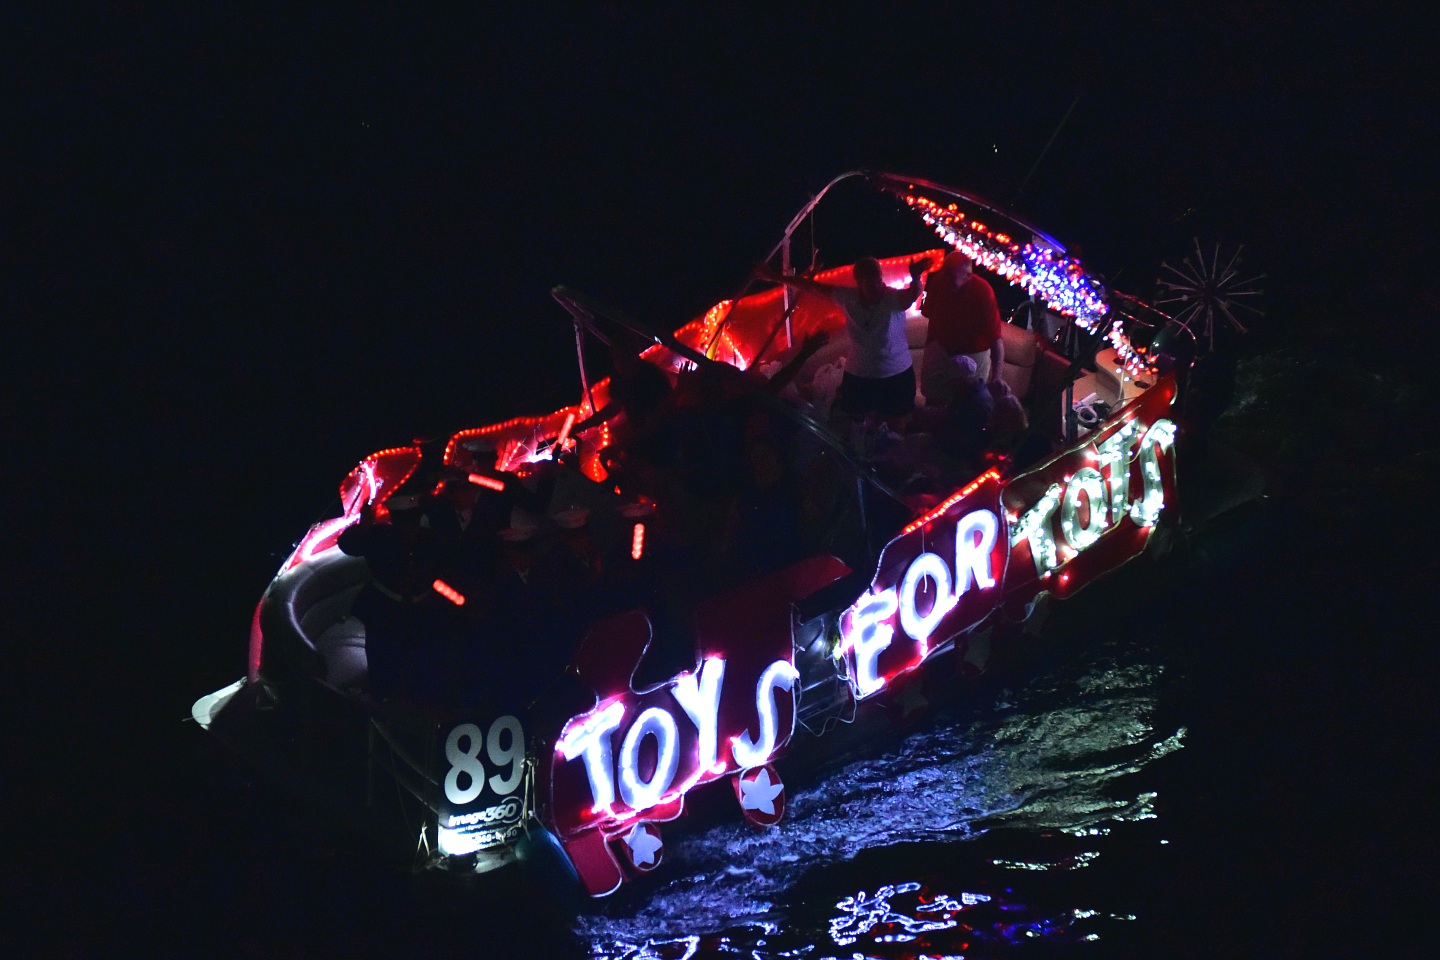 Marine Toys For Tots on board Stay Afloat Party Boat, boat number 89 in the 2021 Winterfest Boat Parade